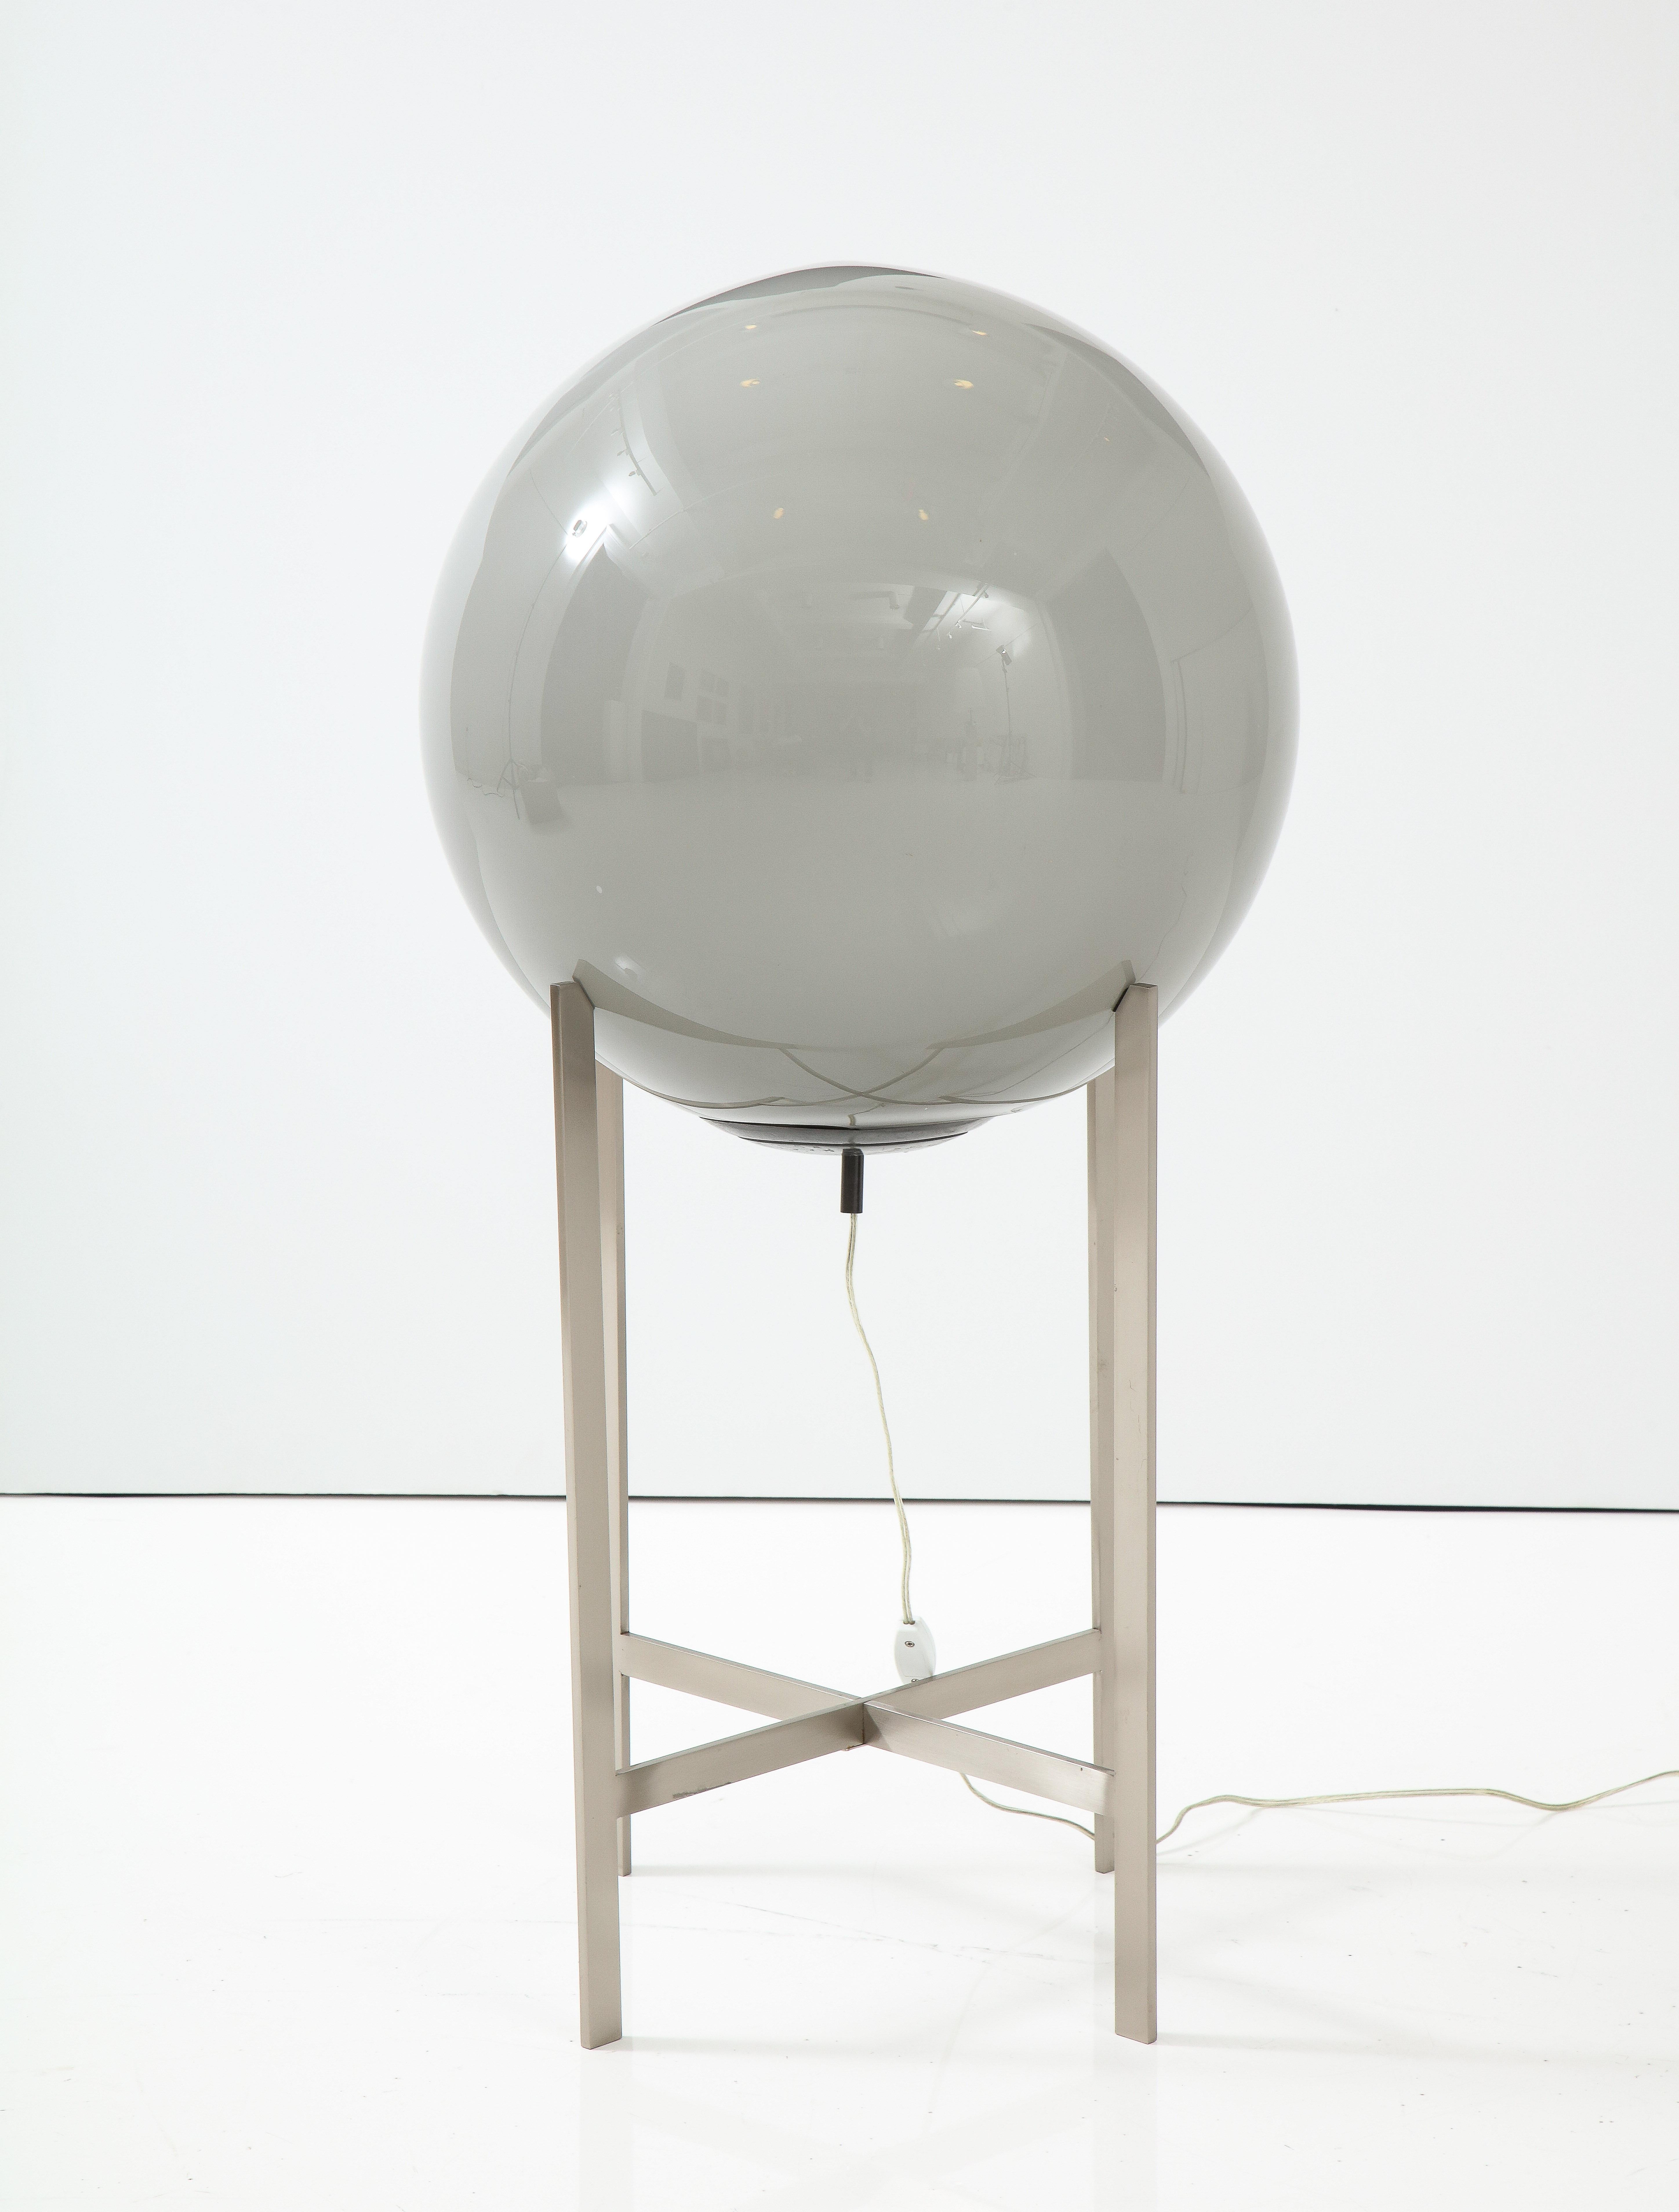 Italian mid century floorlamp featuring a brushed steel stand and an oversized grey Murano orb. C70/80s Italy. Uses 1 bulb. Base is 15